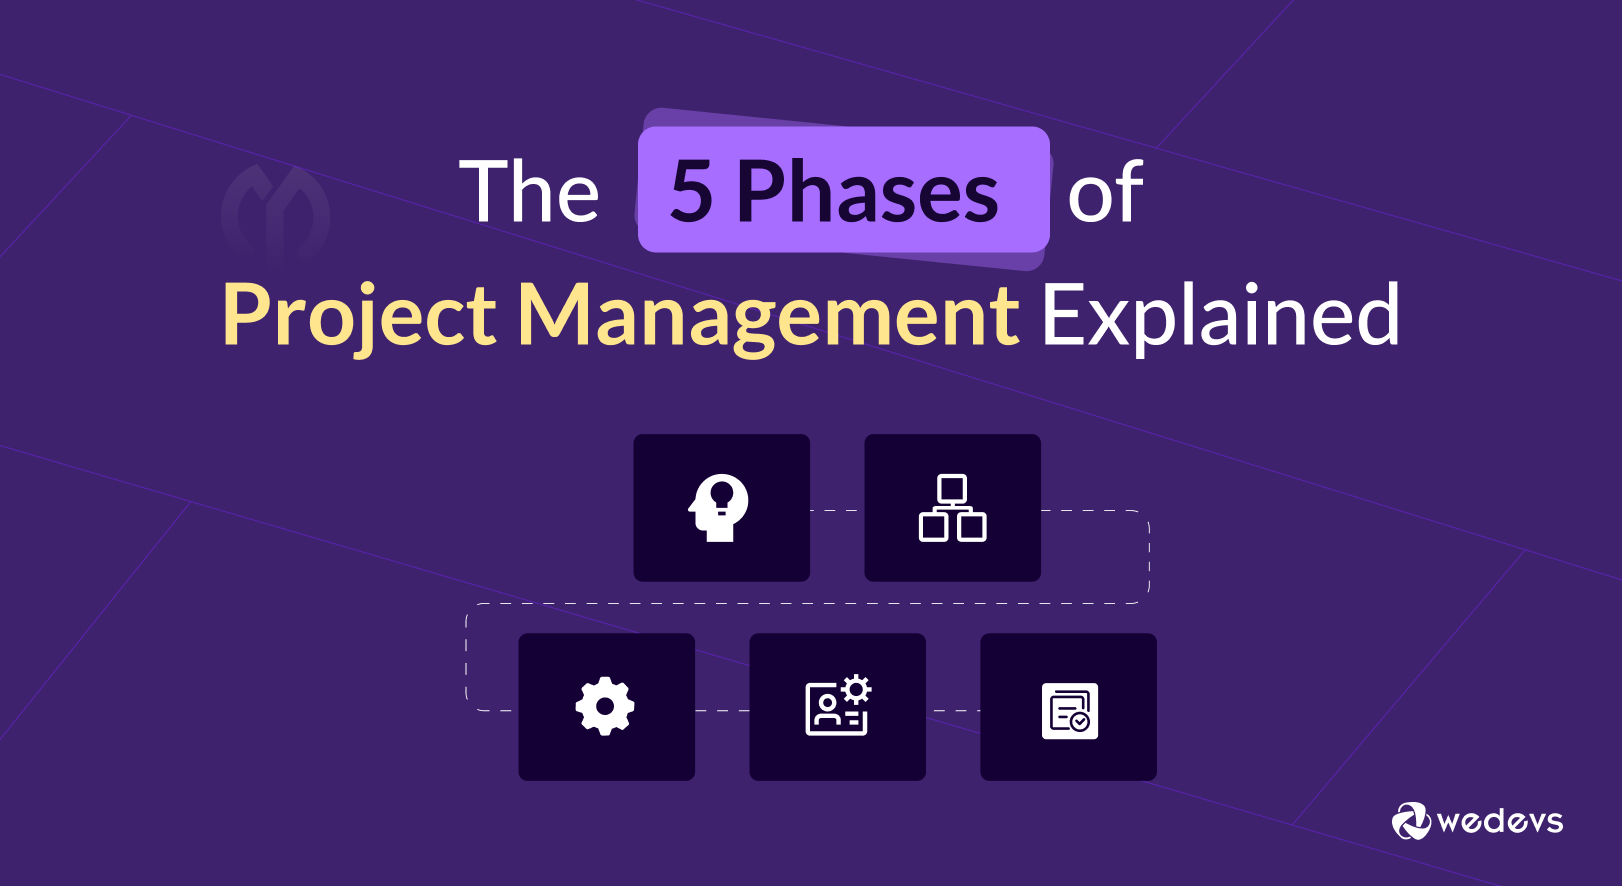 5 Phases of Project Management Explained